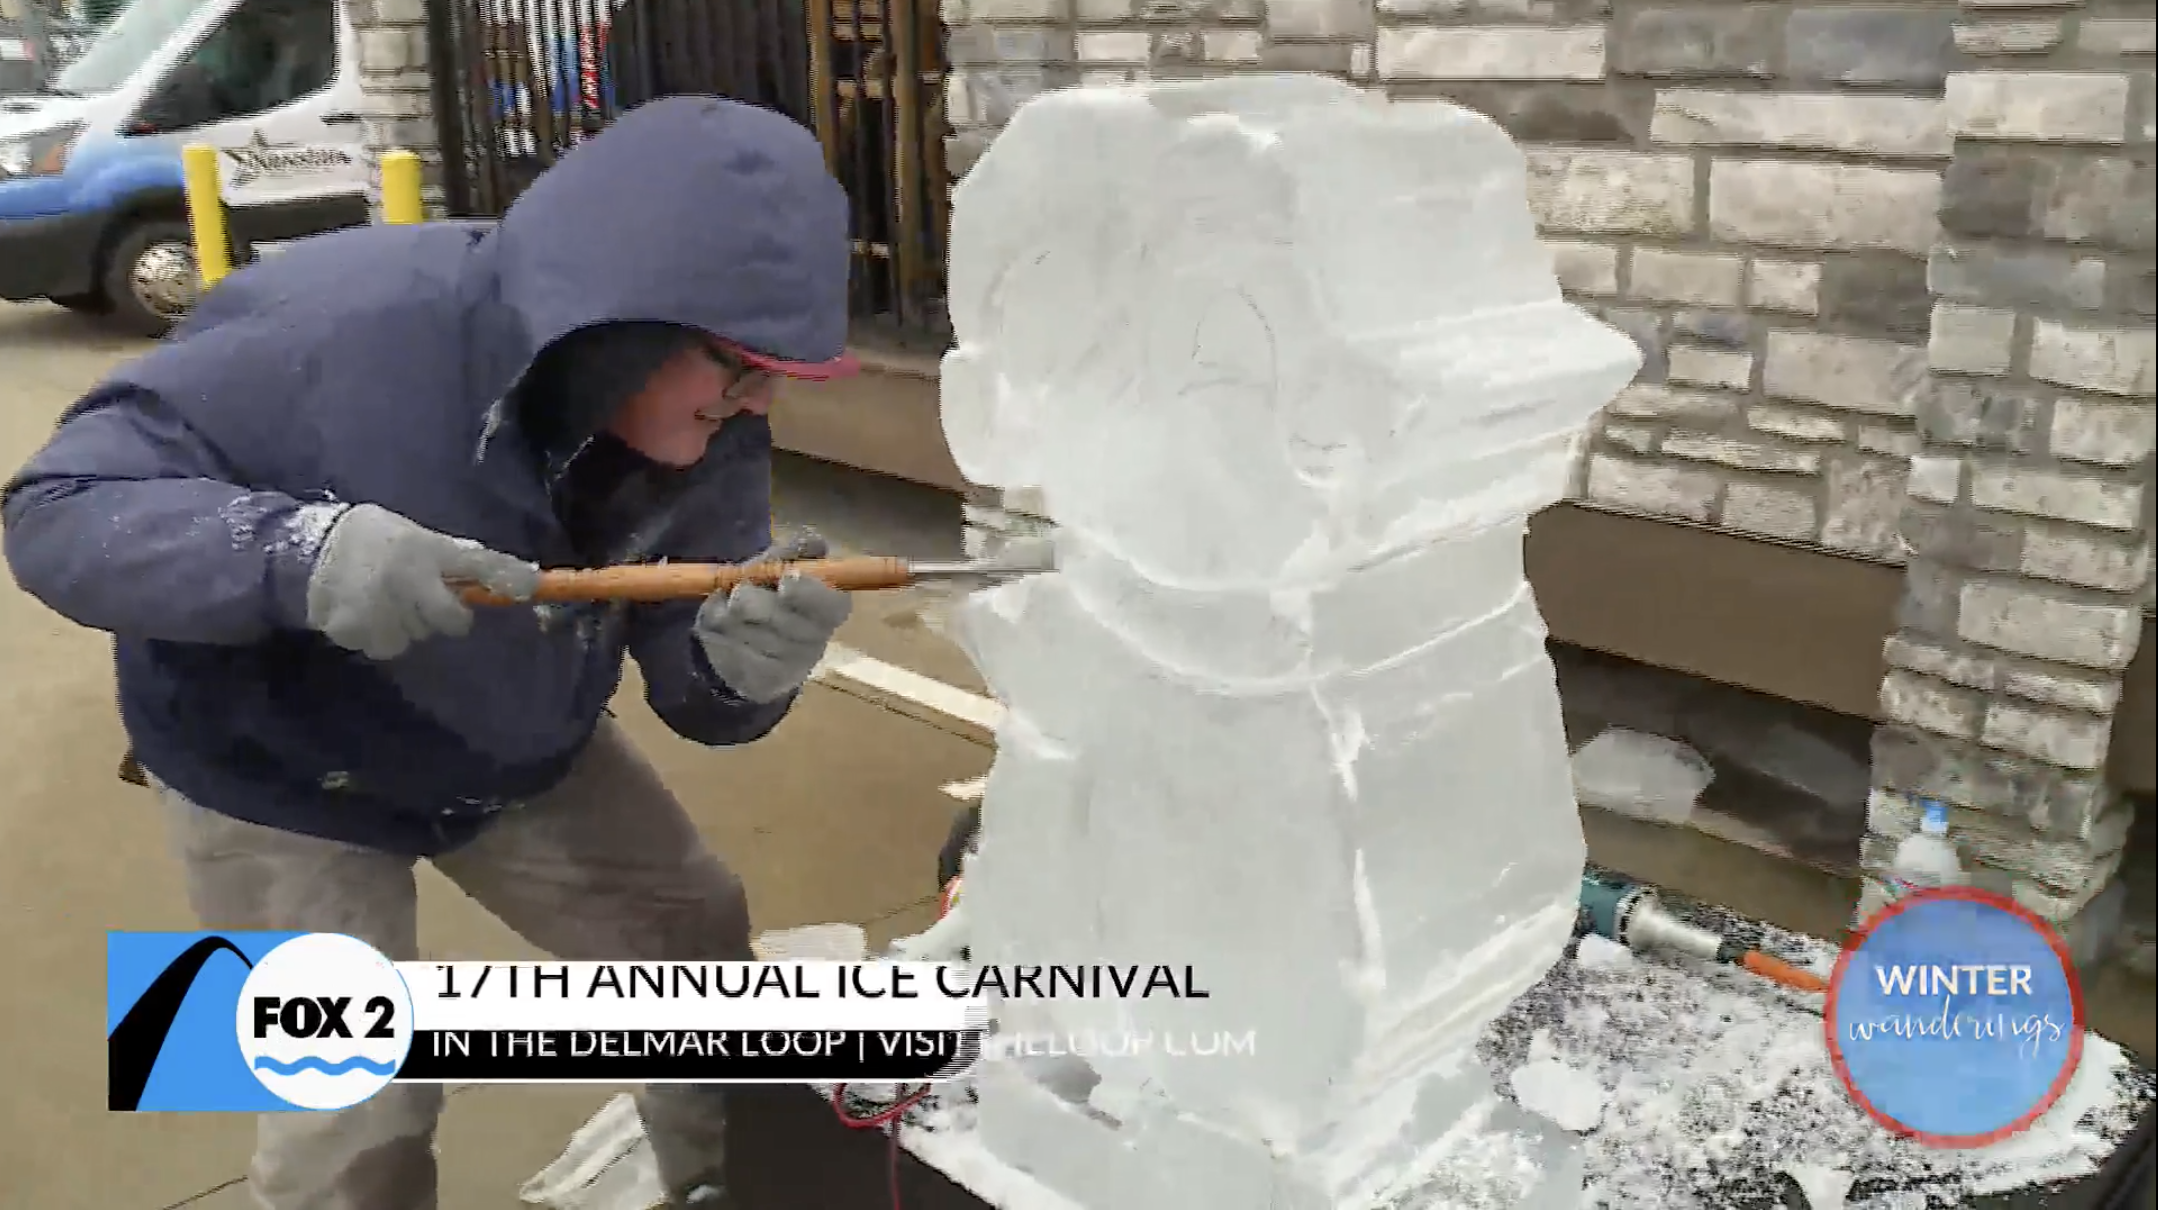 Shaved ice never looked so beautiful – it’s the 17th Annual Ice Carnival